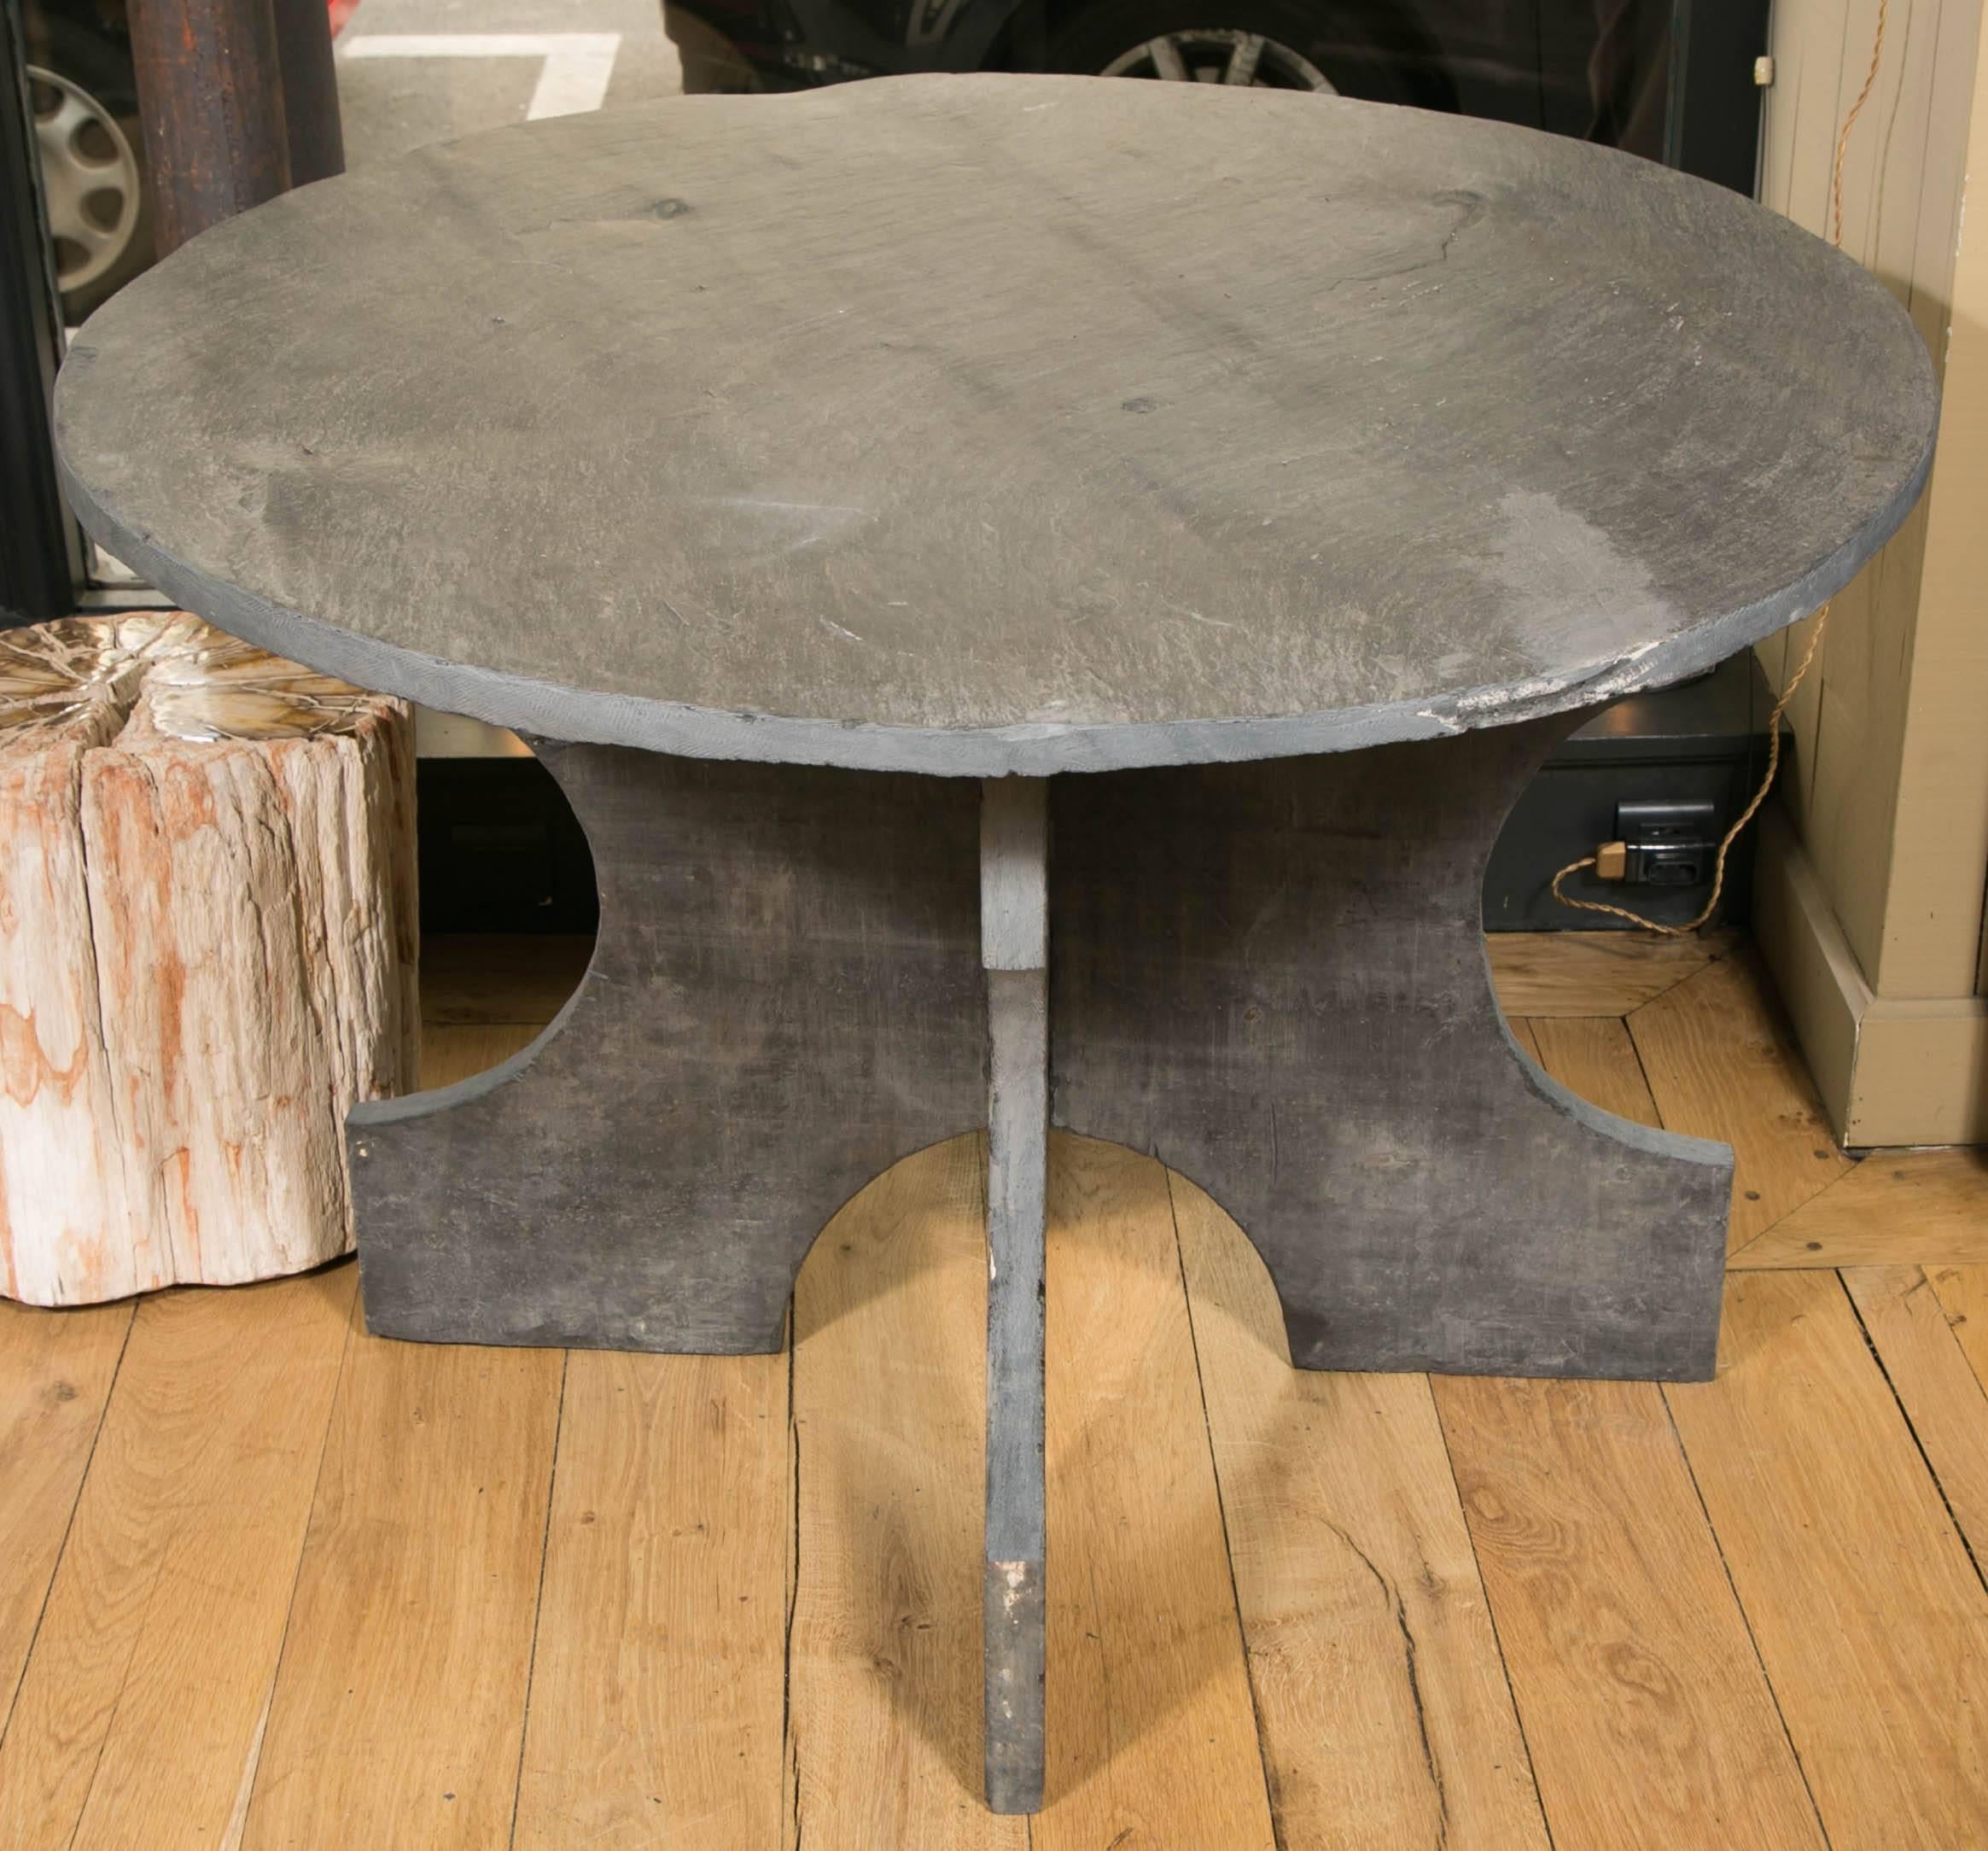 Central or dining table composed of three pieces of solid blue slate from North of France.
The table top was left with it's natural rough surface, simply polished but we can still appreciate deeps and asperities of the natural material.
The base